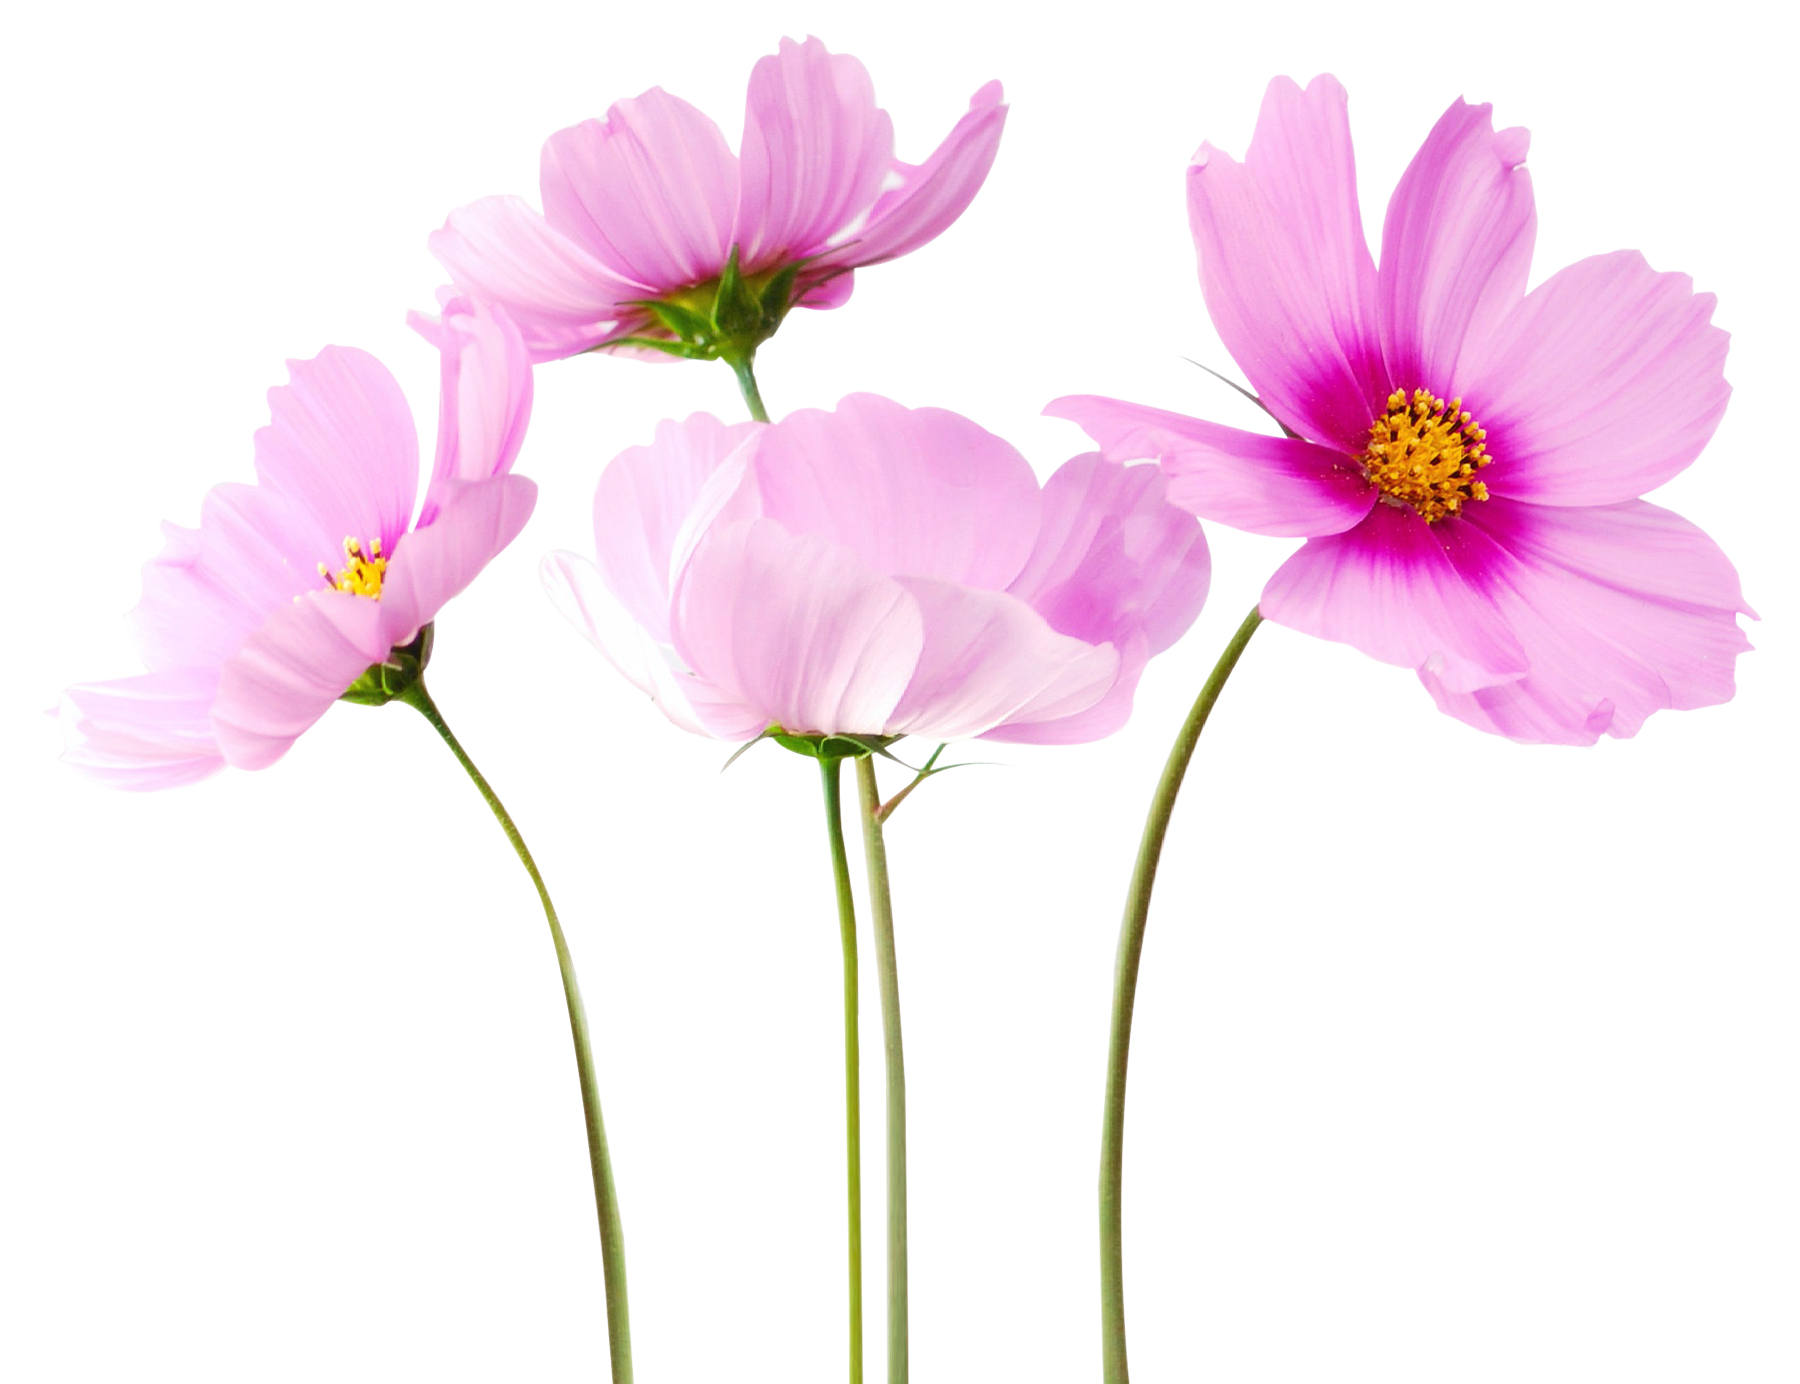 Cosmea image purepng free. Transparent flower png